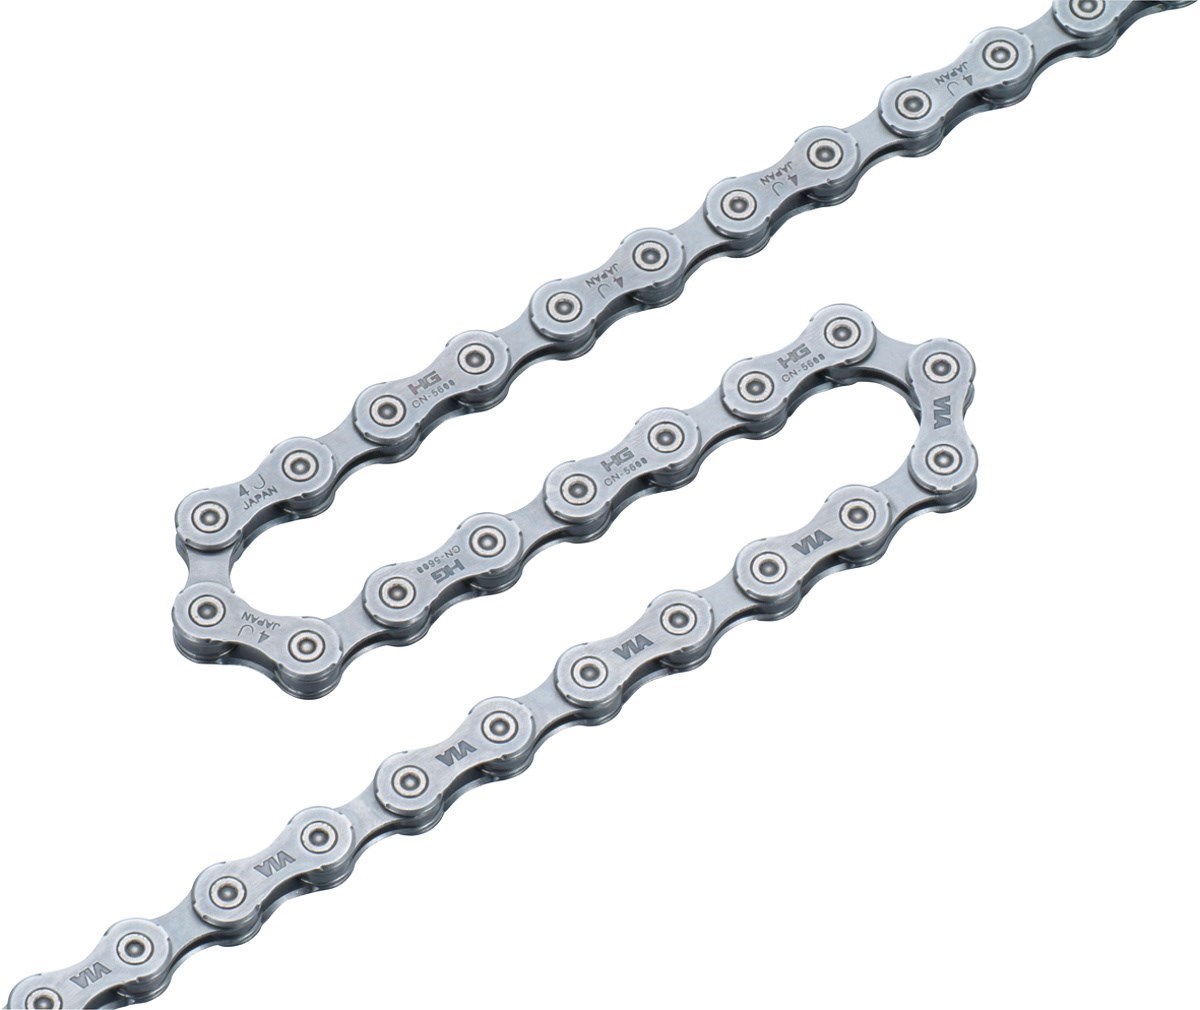 Shimano CN-5600 105 10-Speed Chain product image